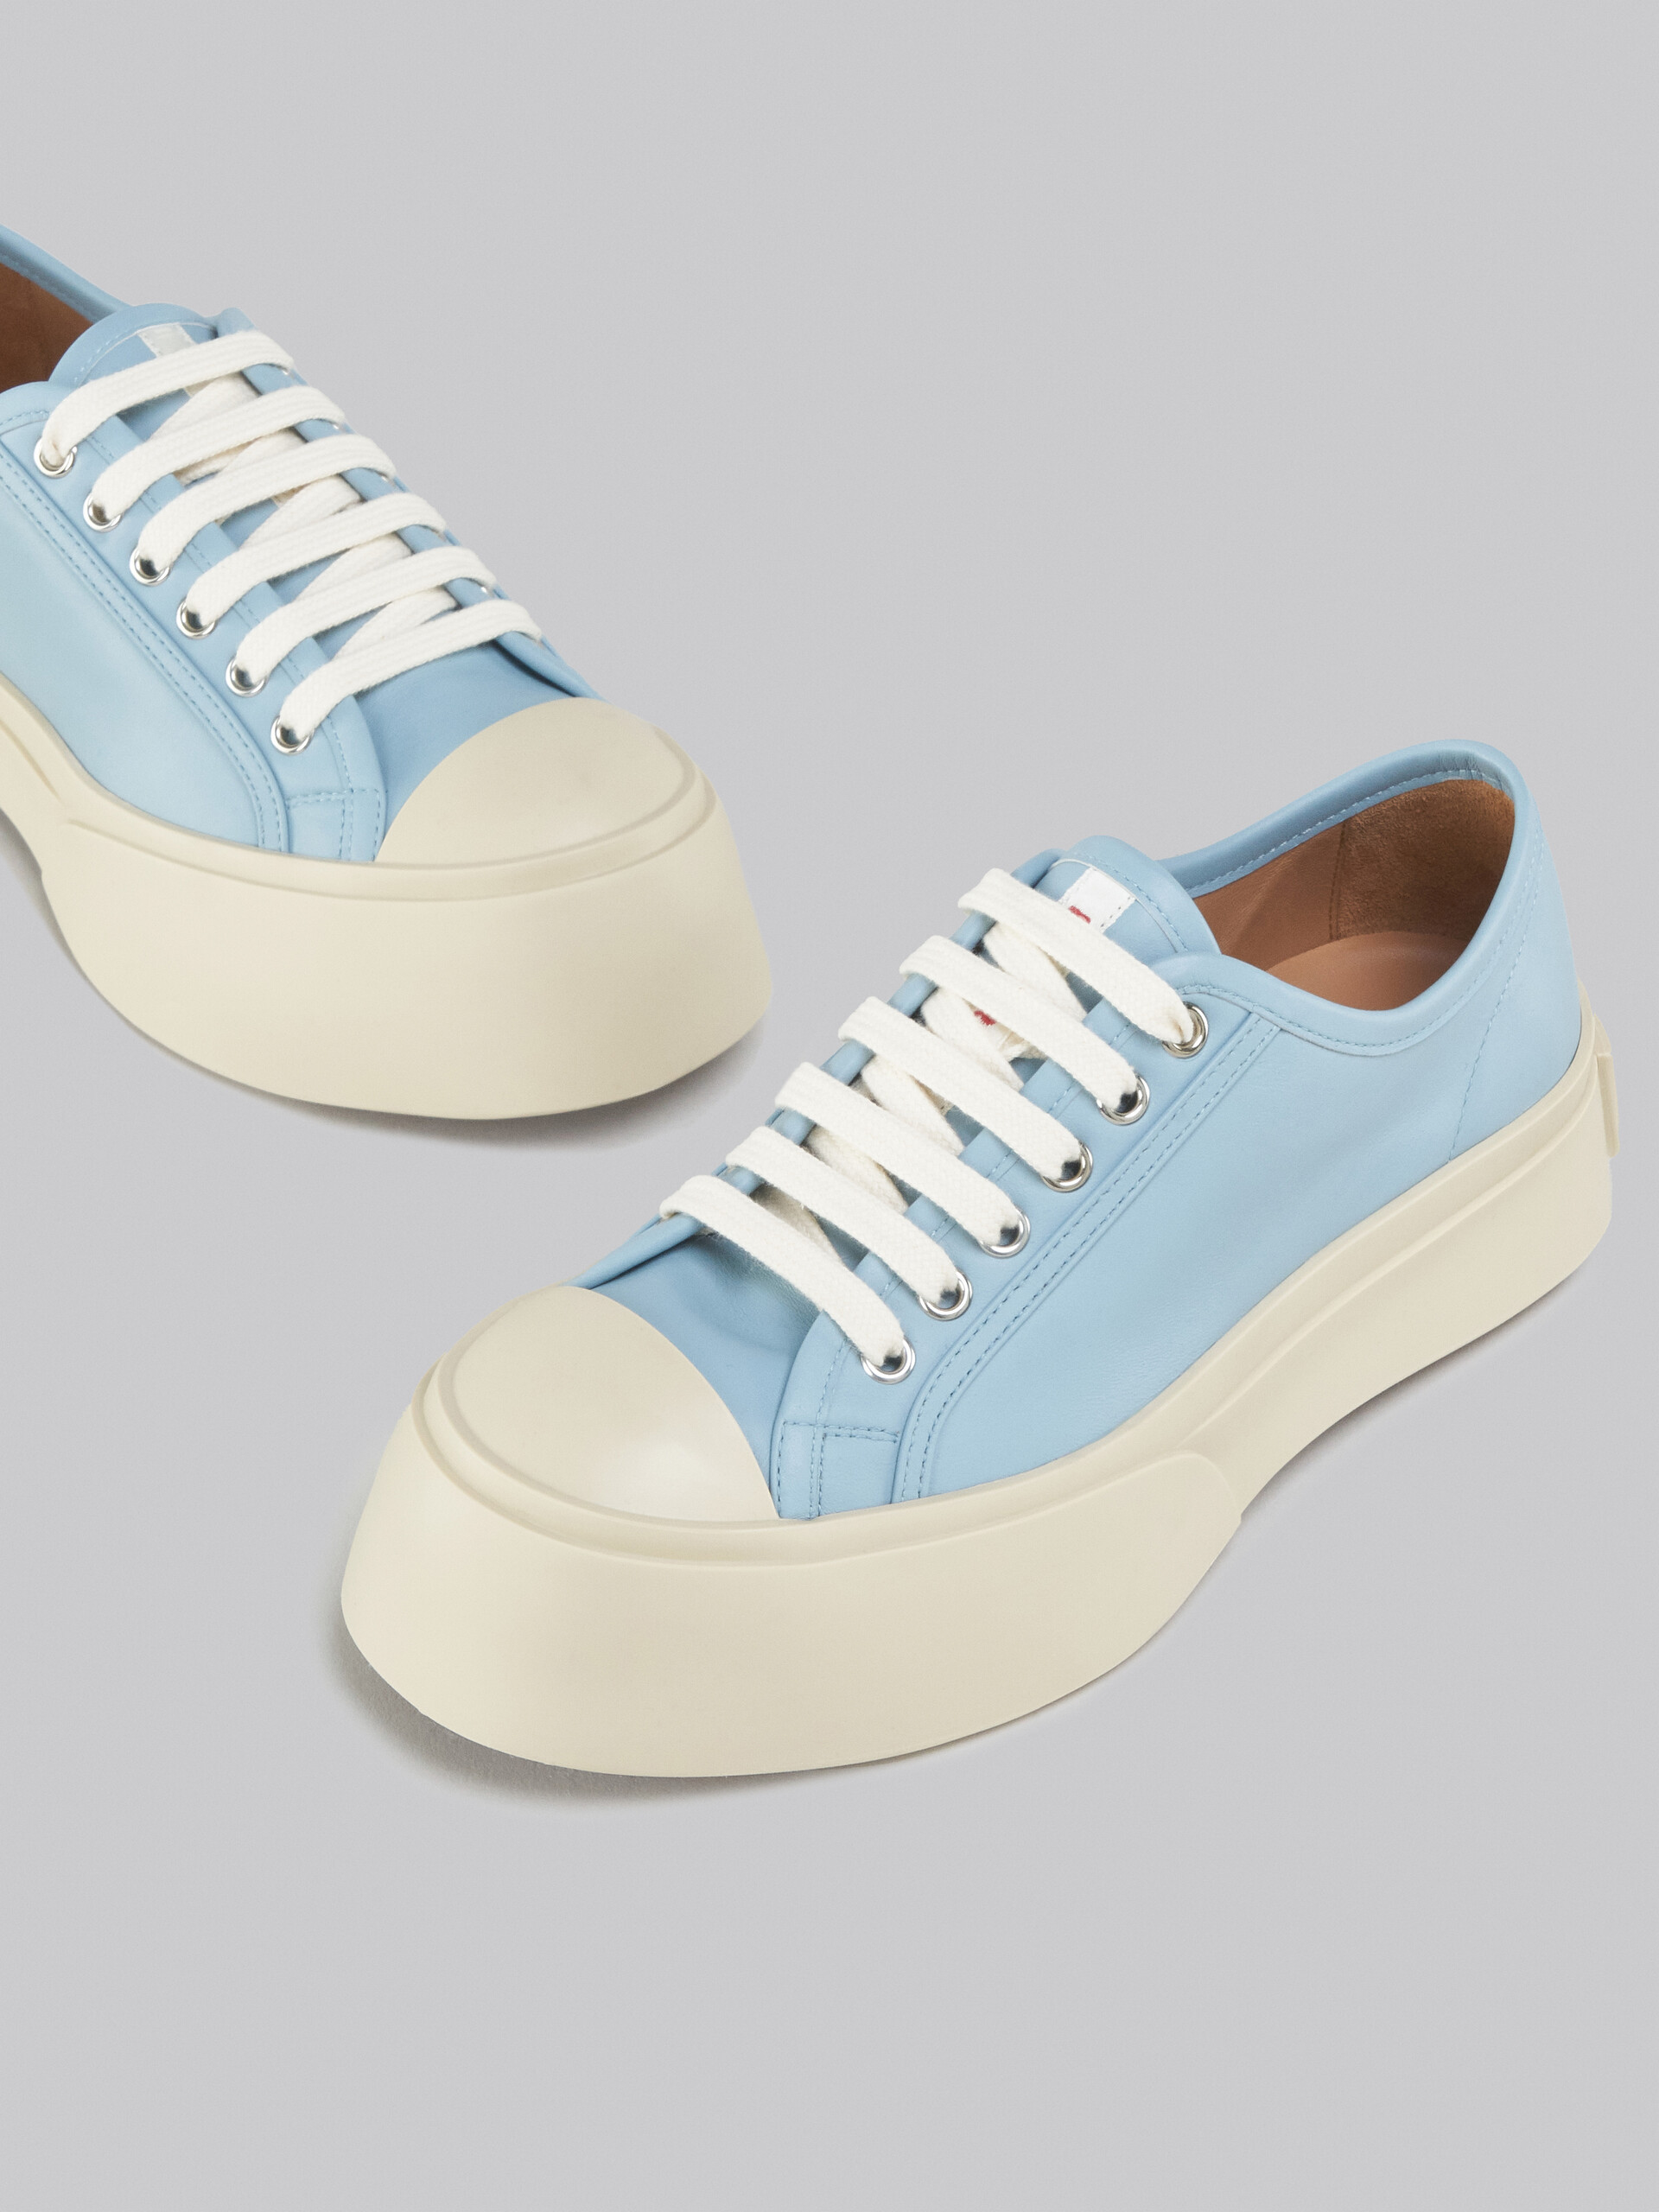 Light blue nappa leather Pablo lace-up sneaker - Sneakers - Image 5